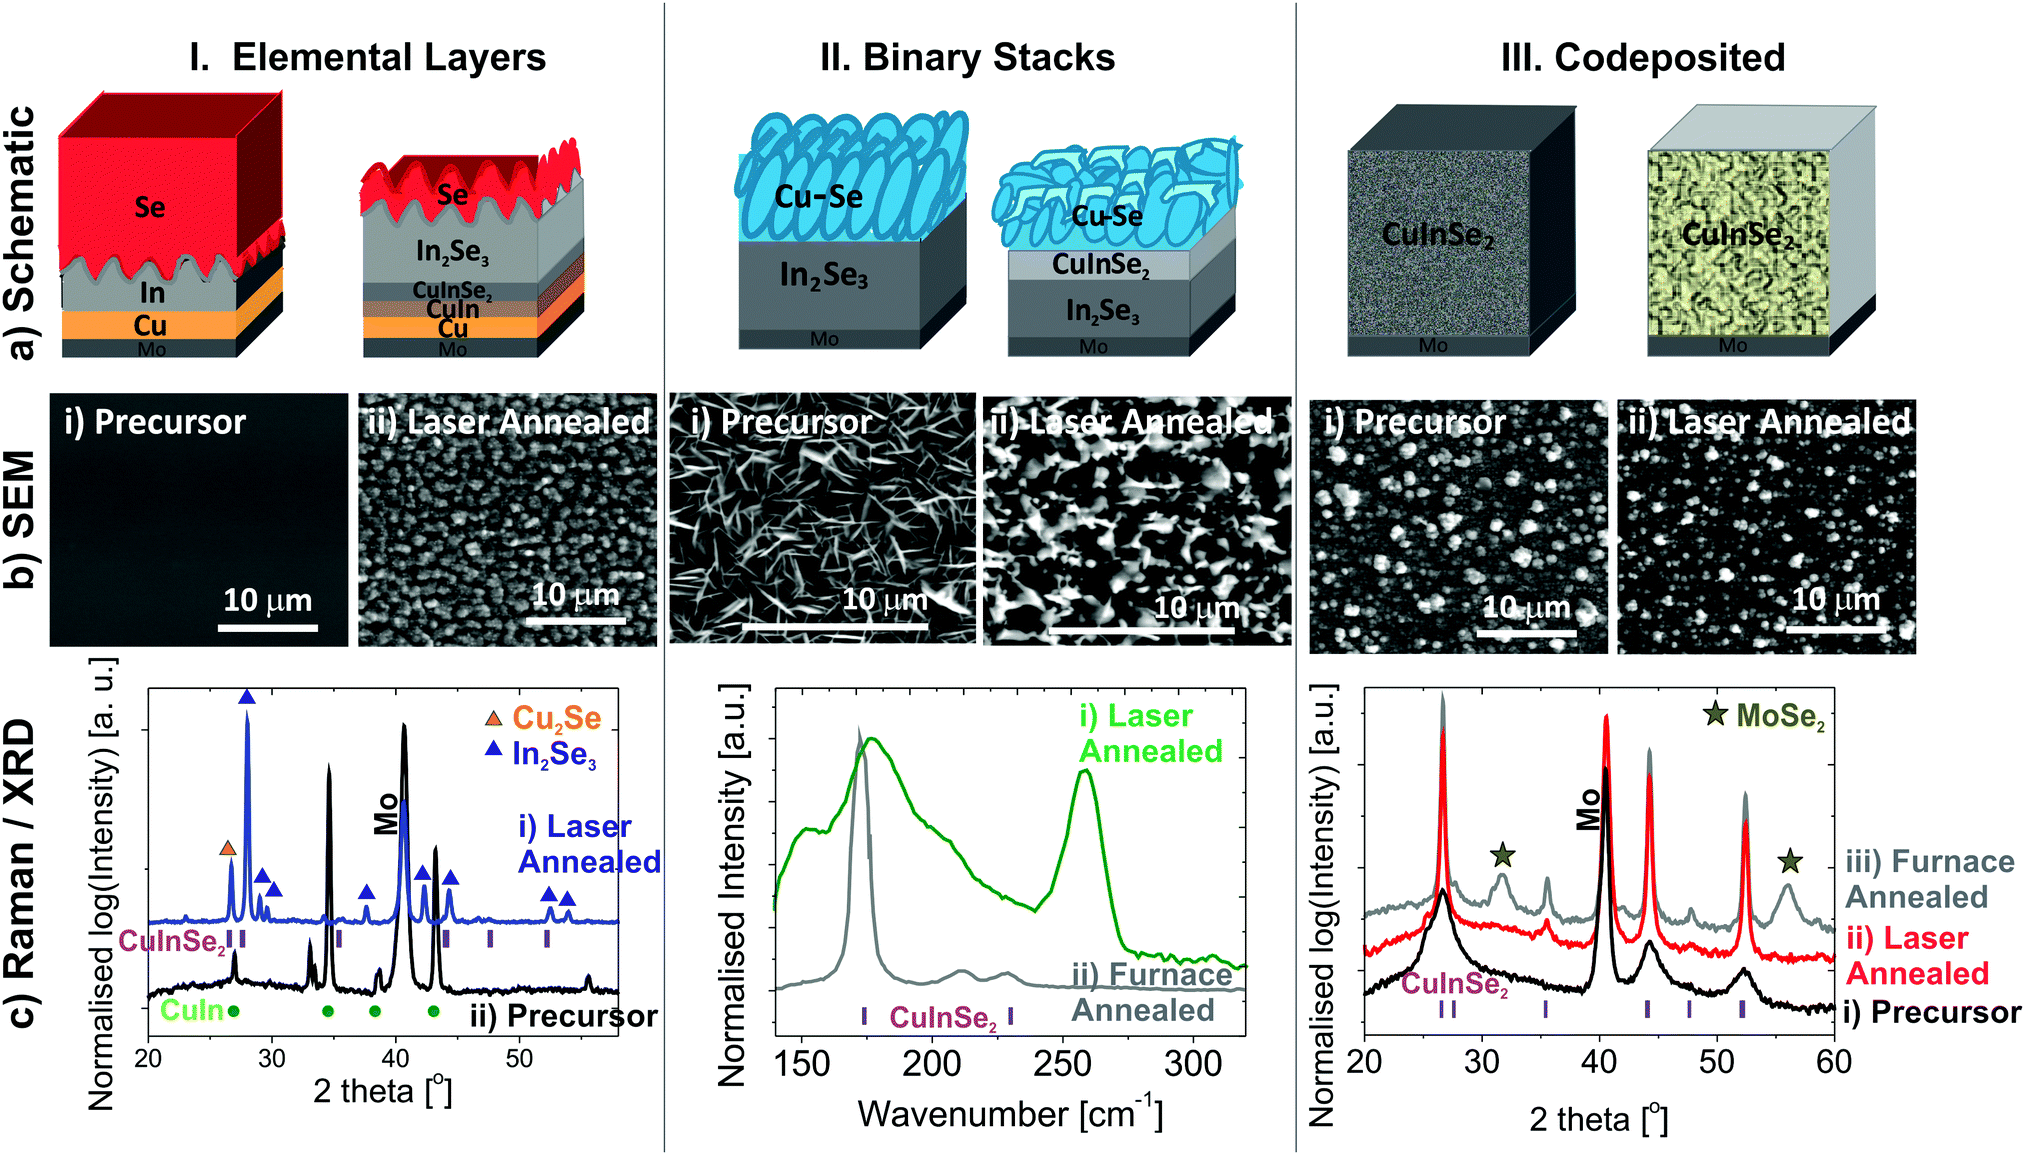 Laser annealing of electrodeposited CuInSe 2 semiconductor precursors:  experiment and modeling - Journal of Materials Chemistry C (RSC Publishing)  DOI:10.1039/C6TC03623F